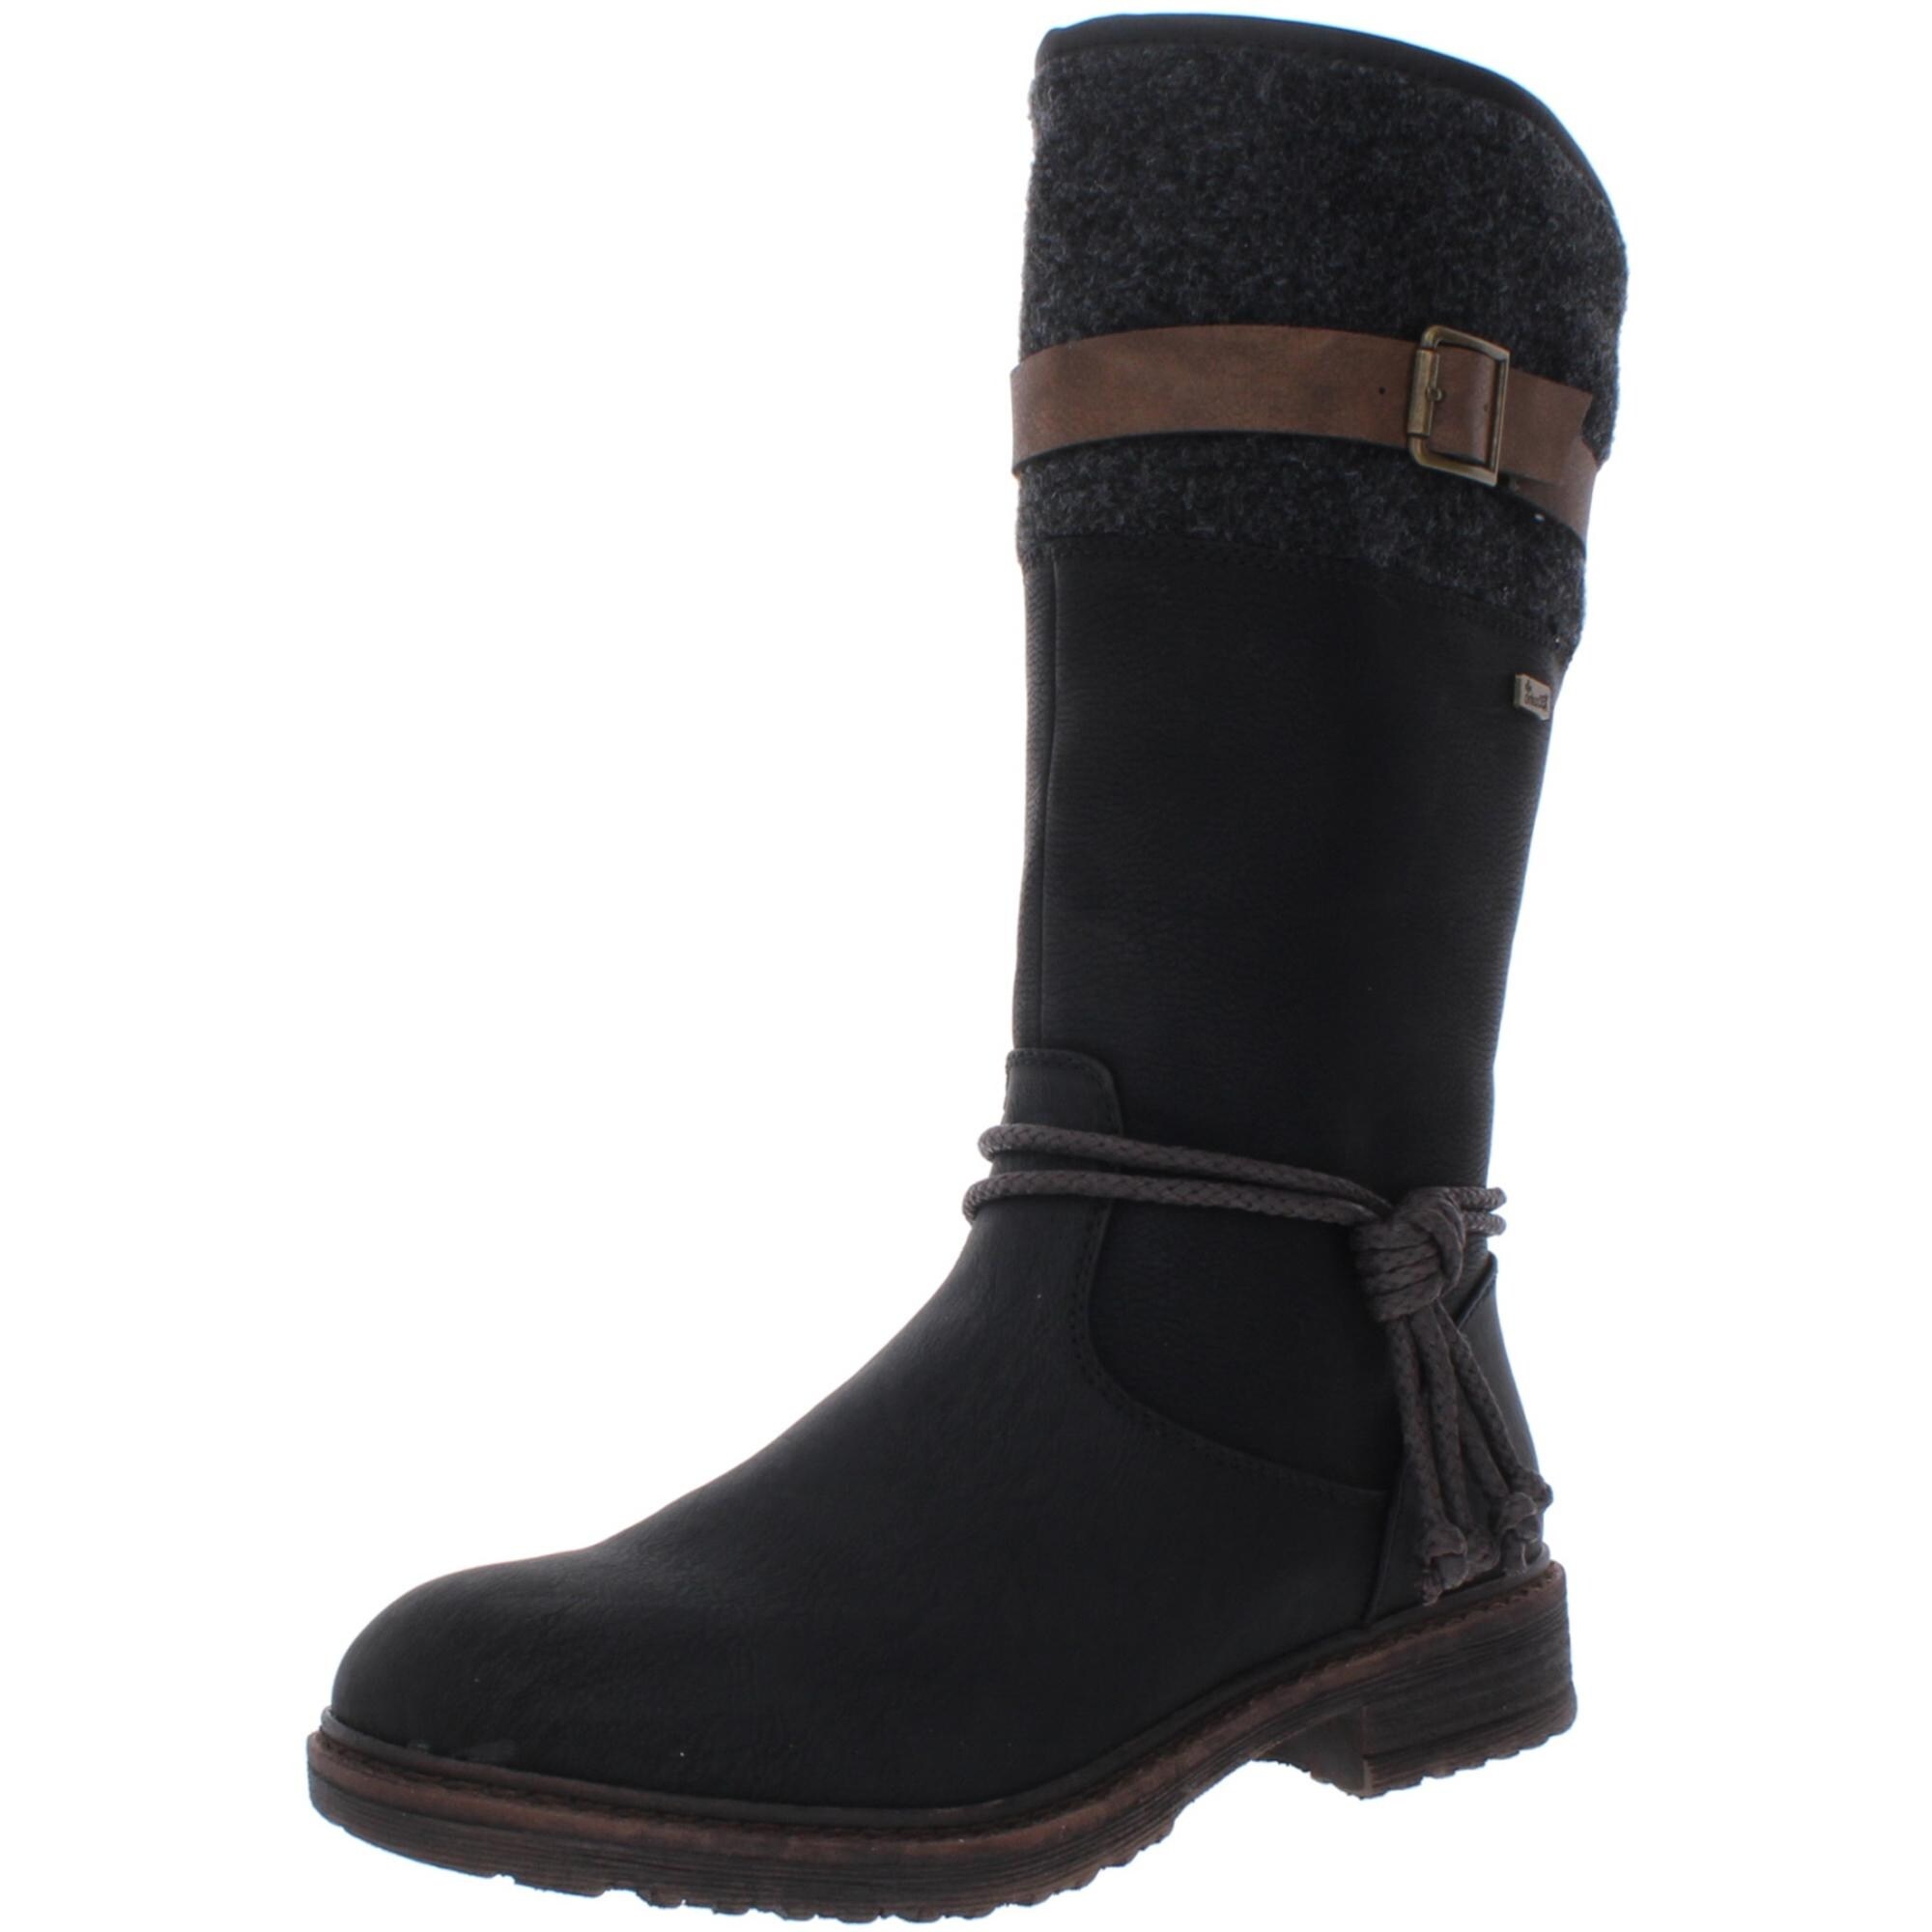 rieker lace up mid calf boot